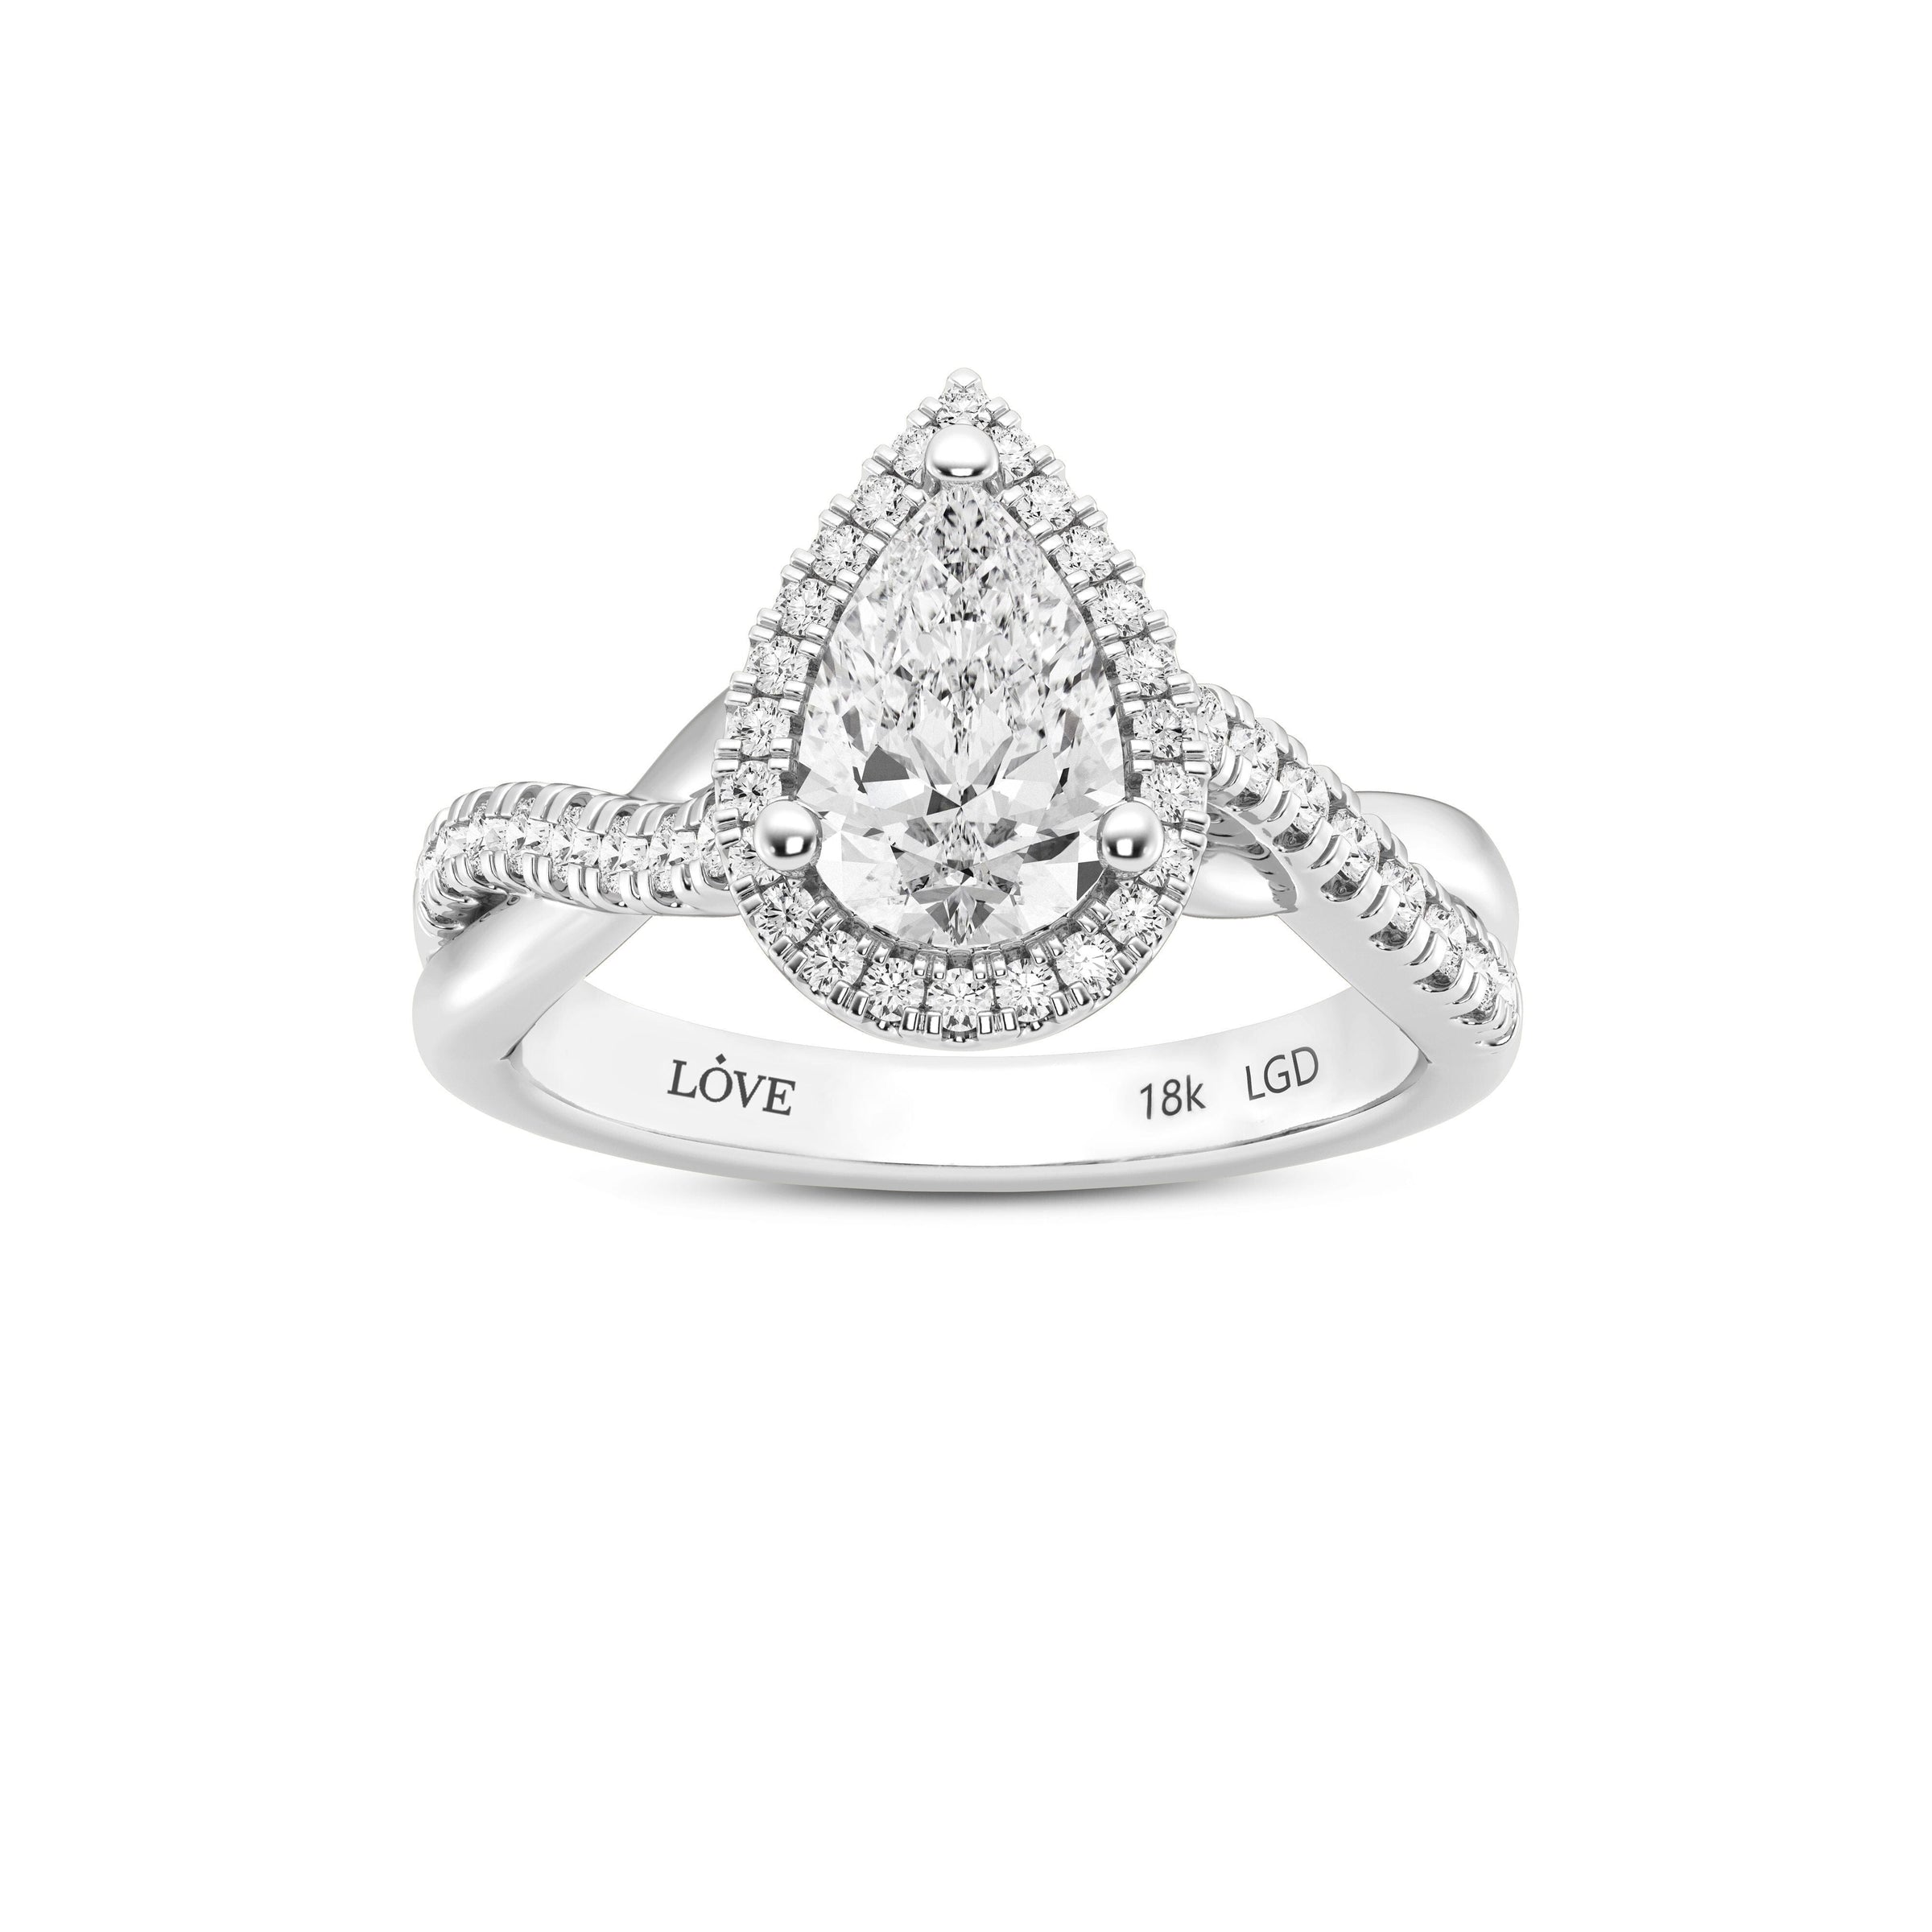 Love by Michelle Beville Pear Halo Ring with 1.35ct of Laboratory Grown Diamonds in 18ct White Gold Rings Bevilles 